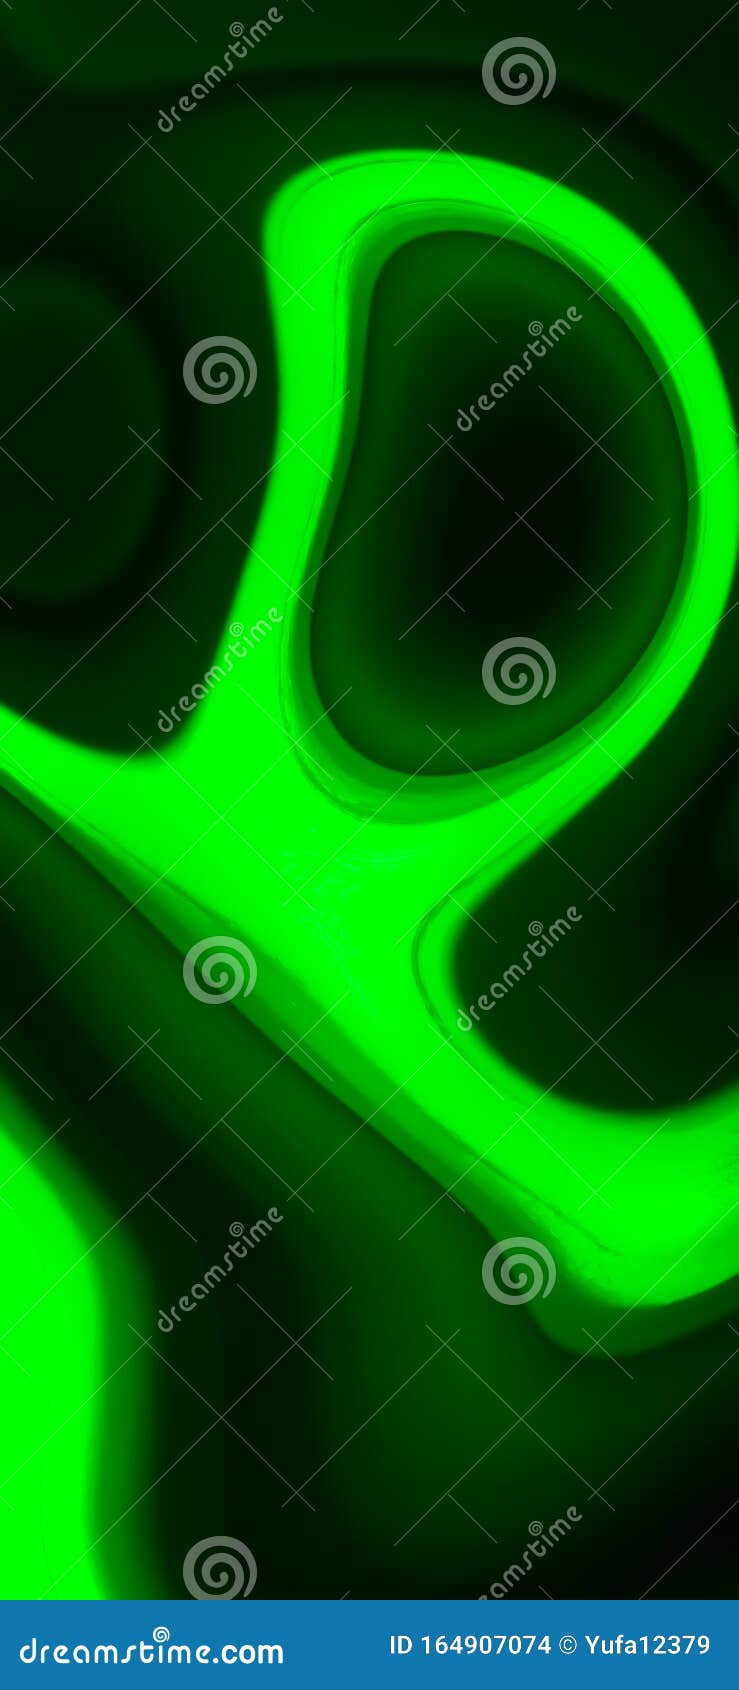 Abstract Vibrant Neon Background on Screen Device Display. Blurred Color  Gradient Wallpapers Stock Illustration - Illustration of collection,  desktop: 164907074